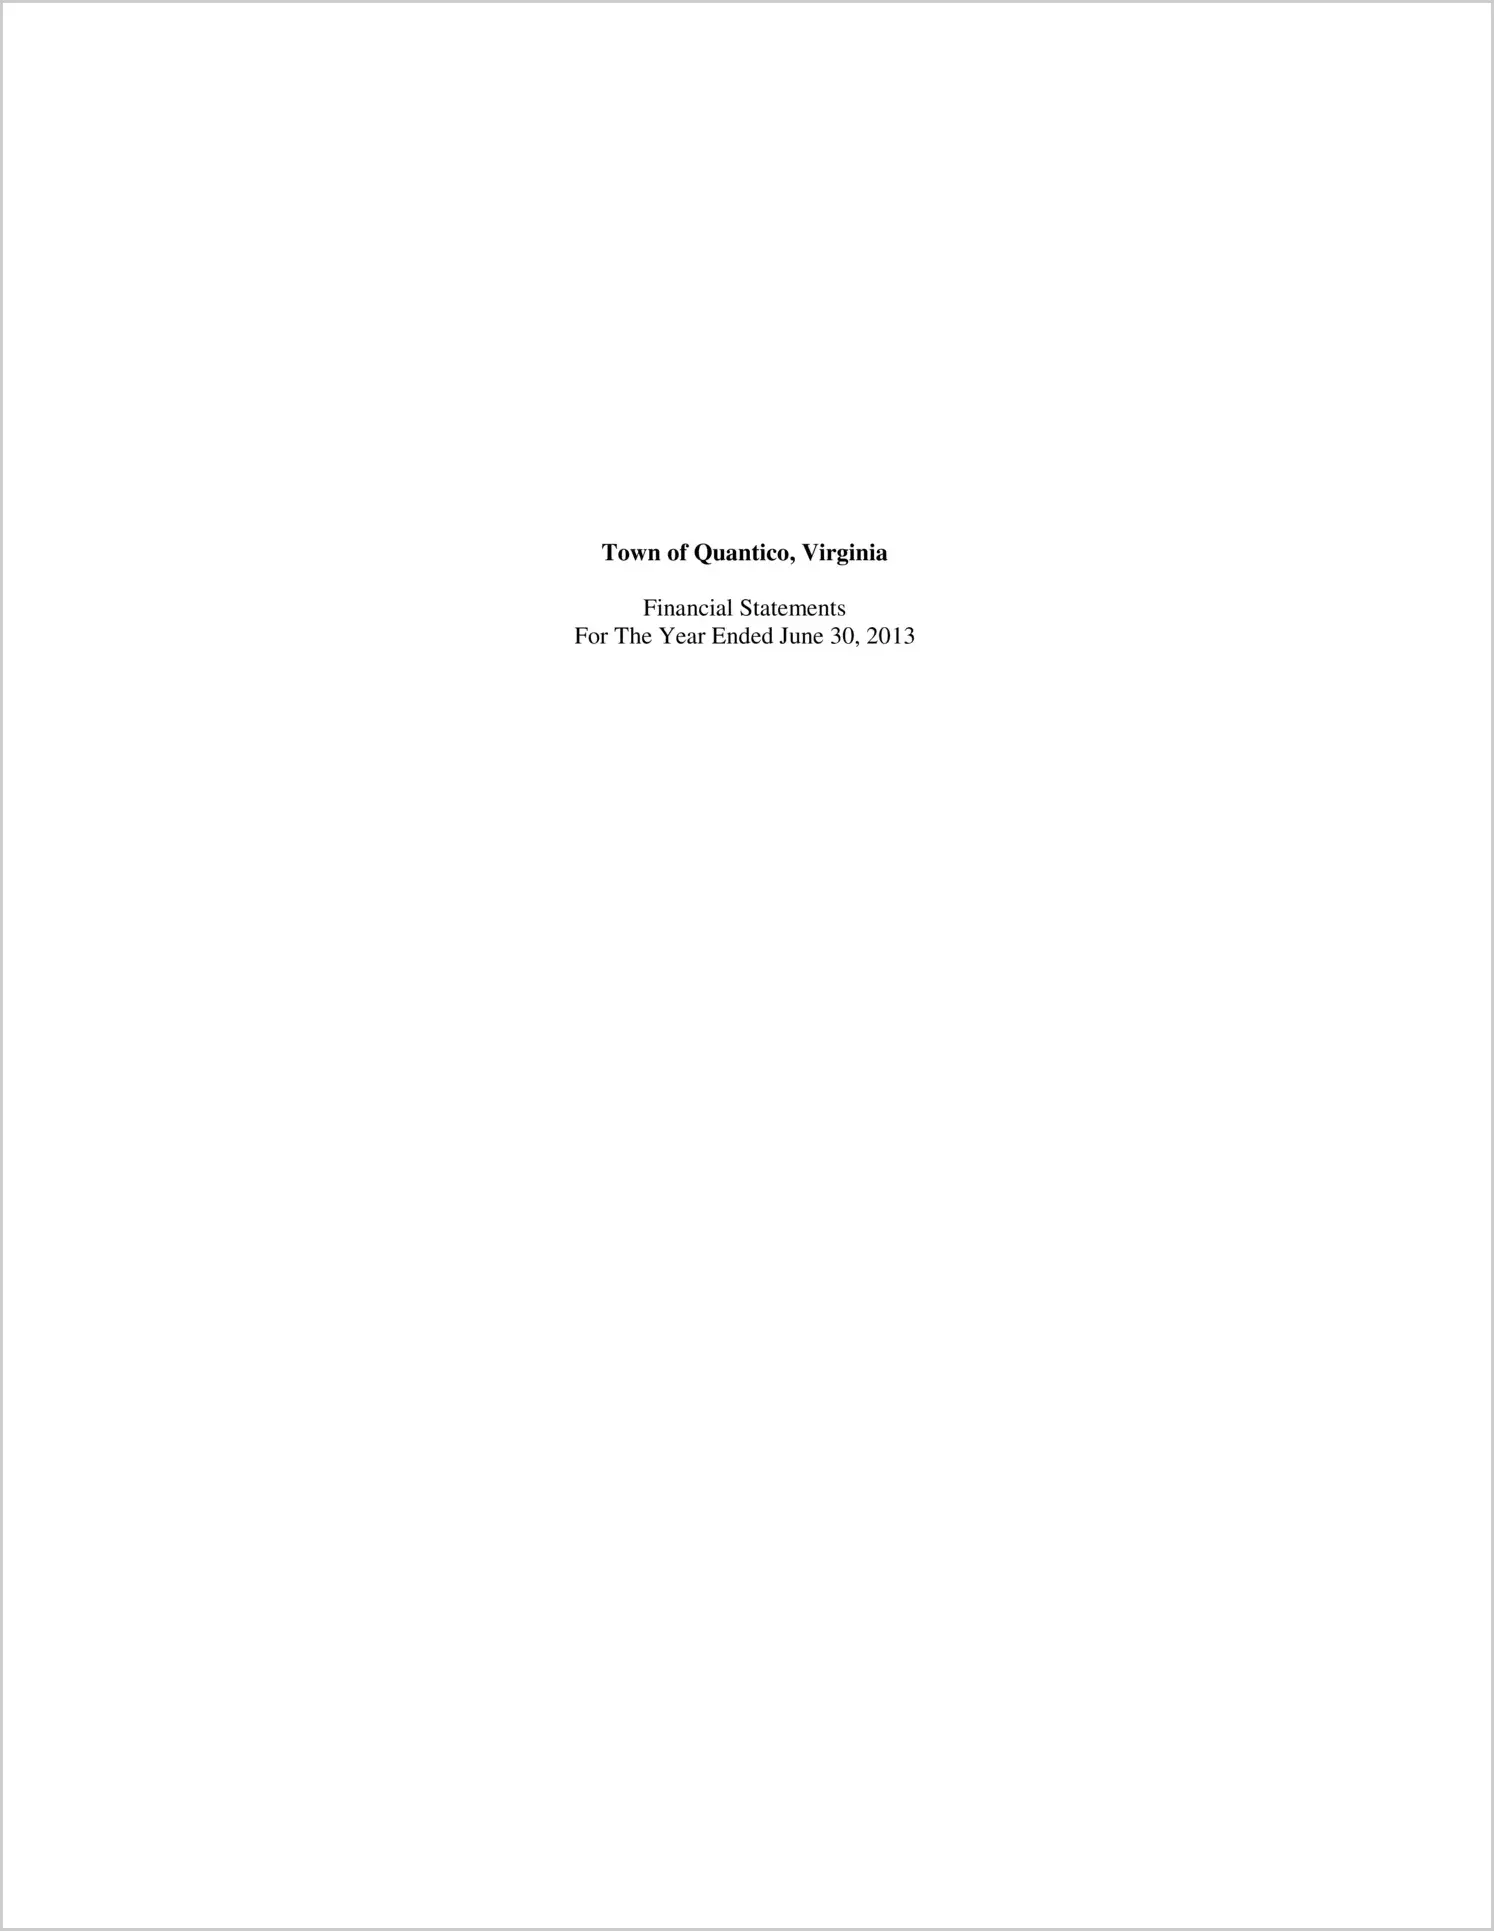 2013 Annual Financial Report for Town of Quantico